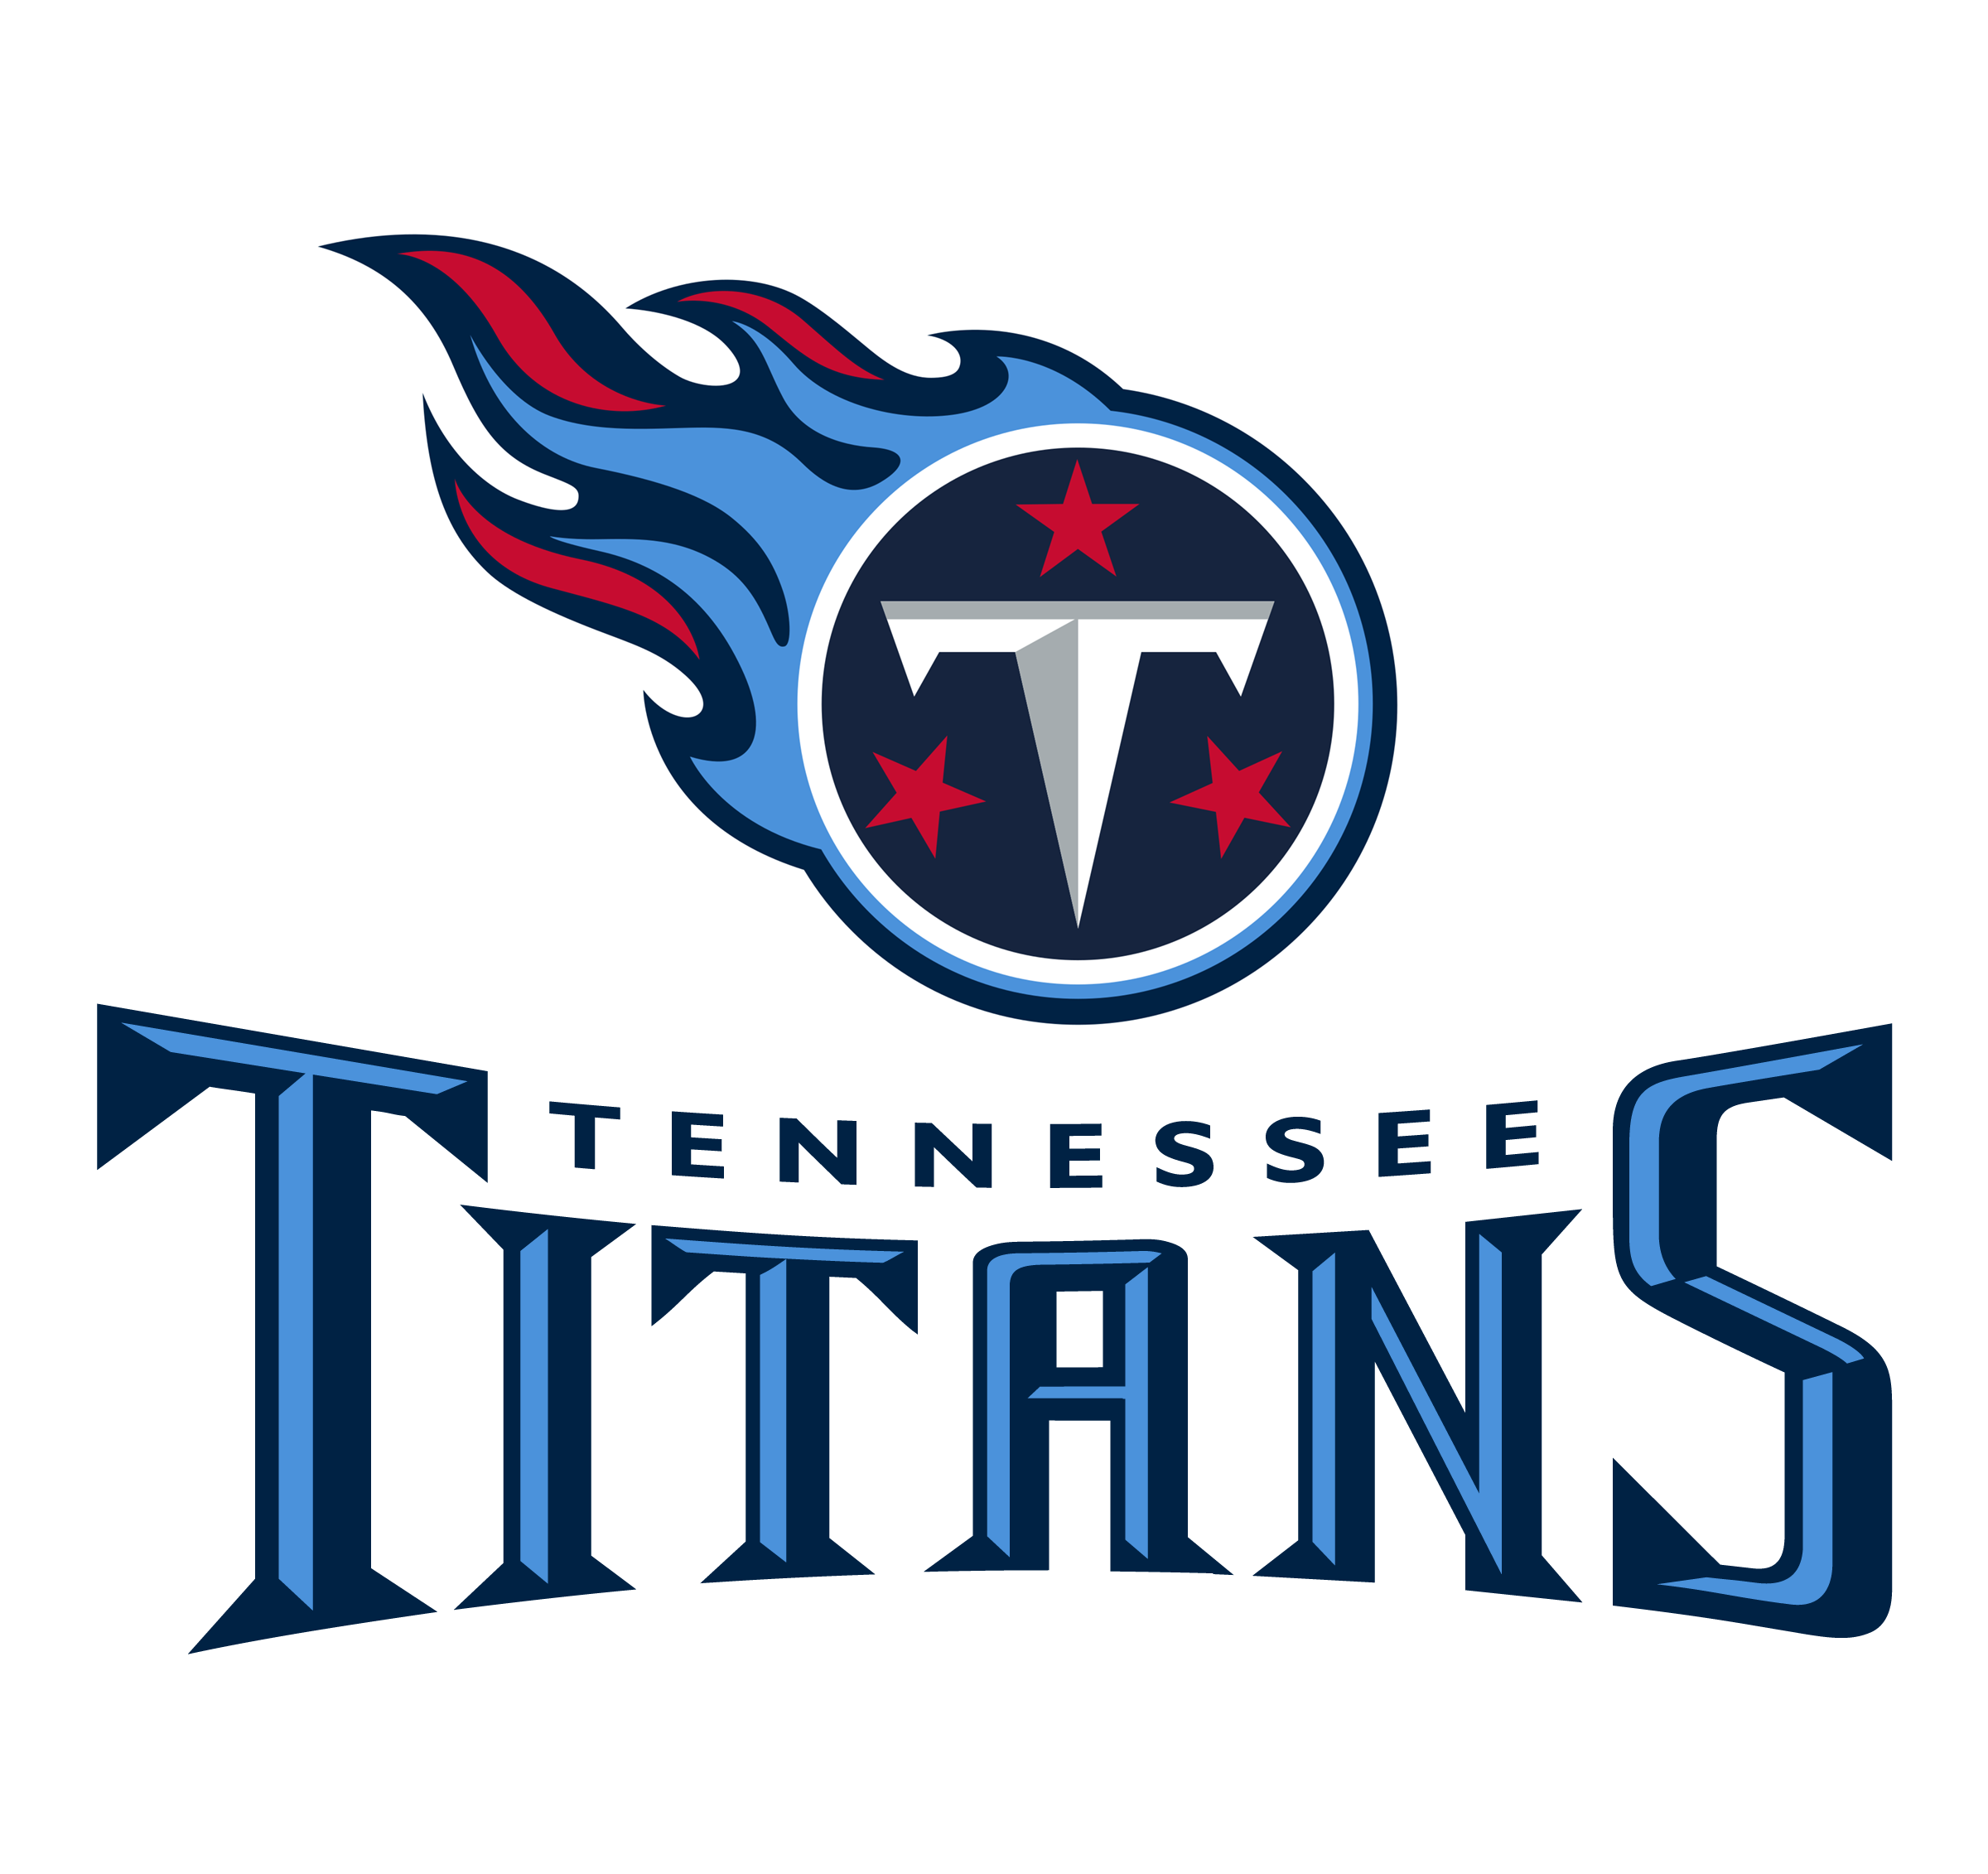 Tennessee Titans Football Logo - Tennessee Titans Vector, Transparent background PNG HD thumbnail